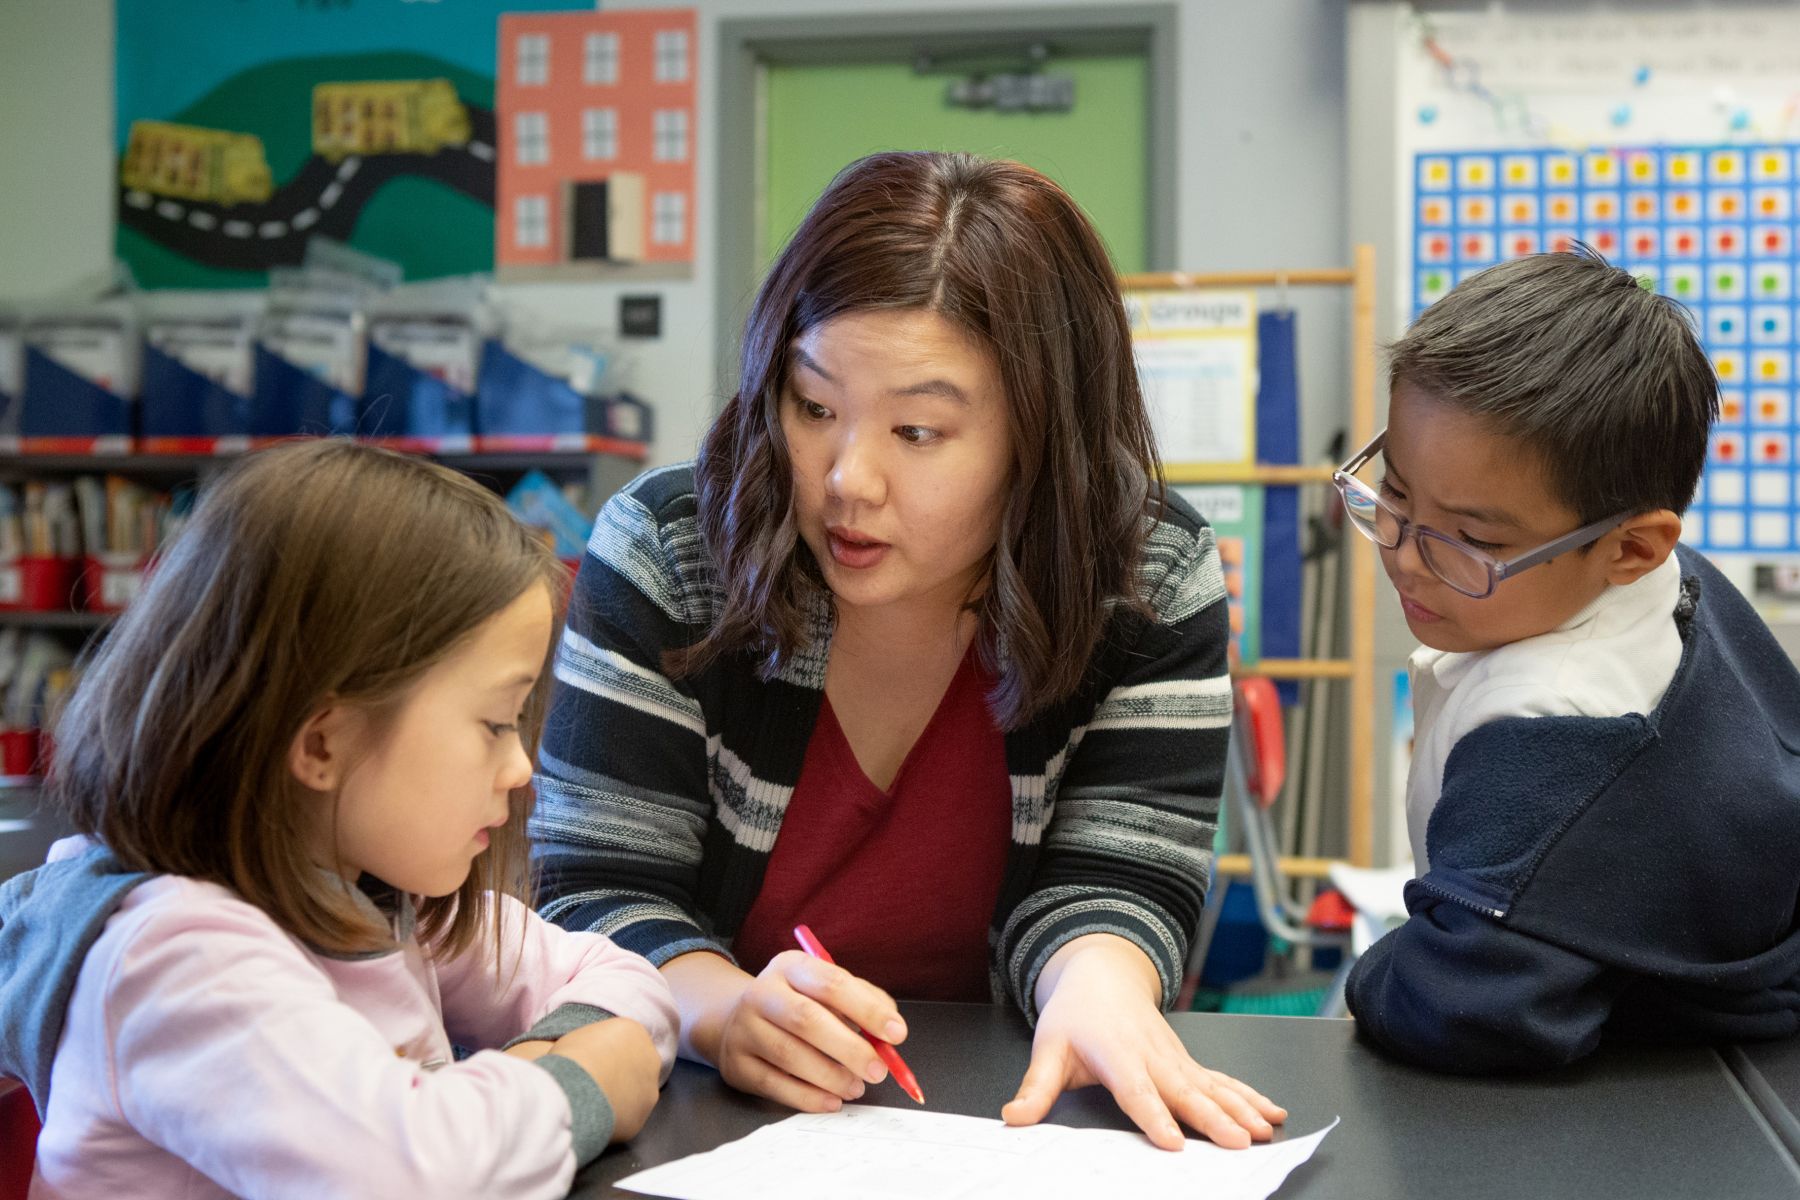 A woman speaking to two young children at a table, while writing on a piece of paper.